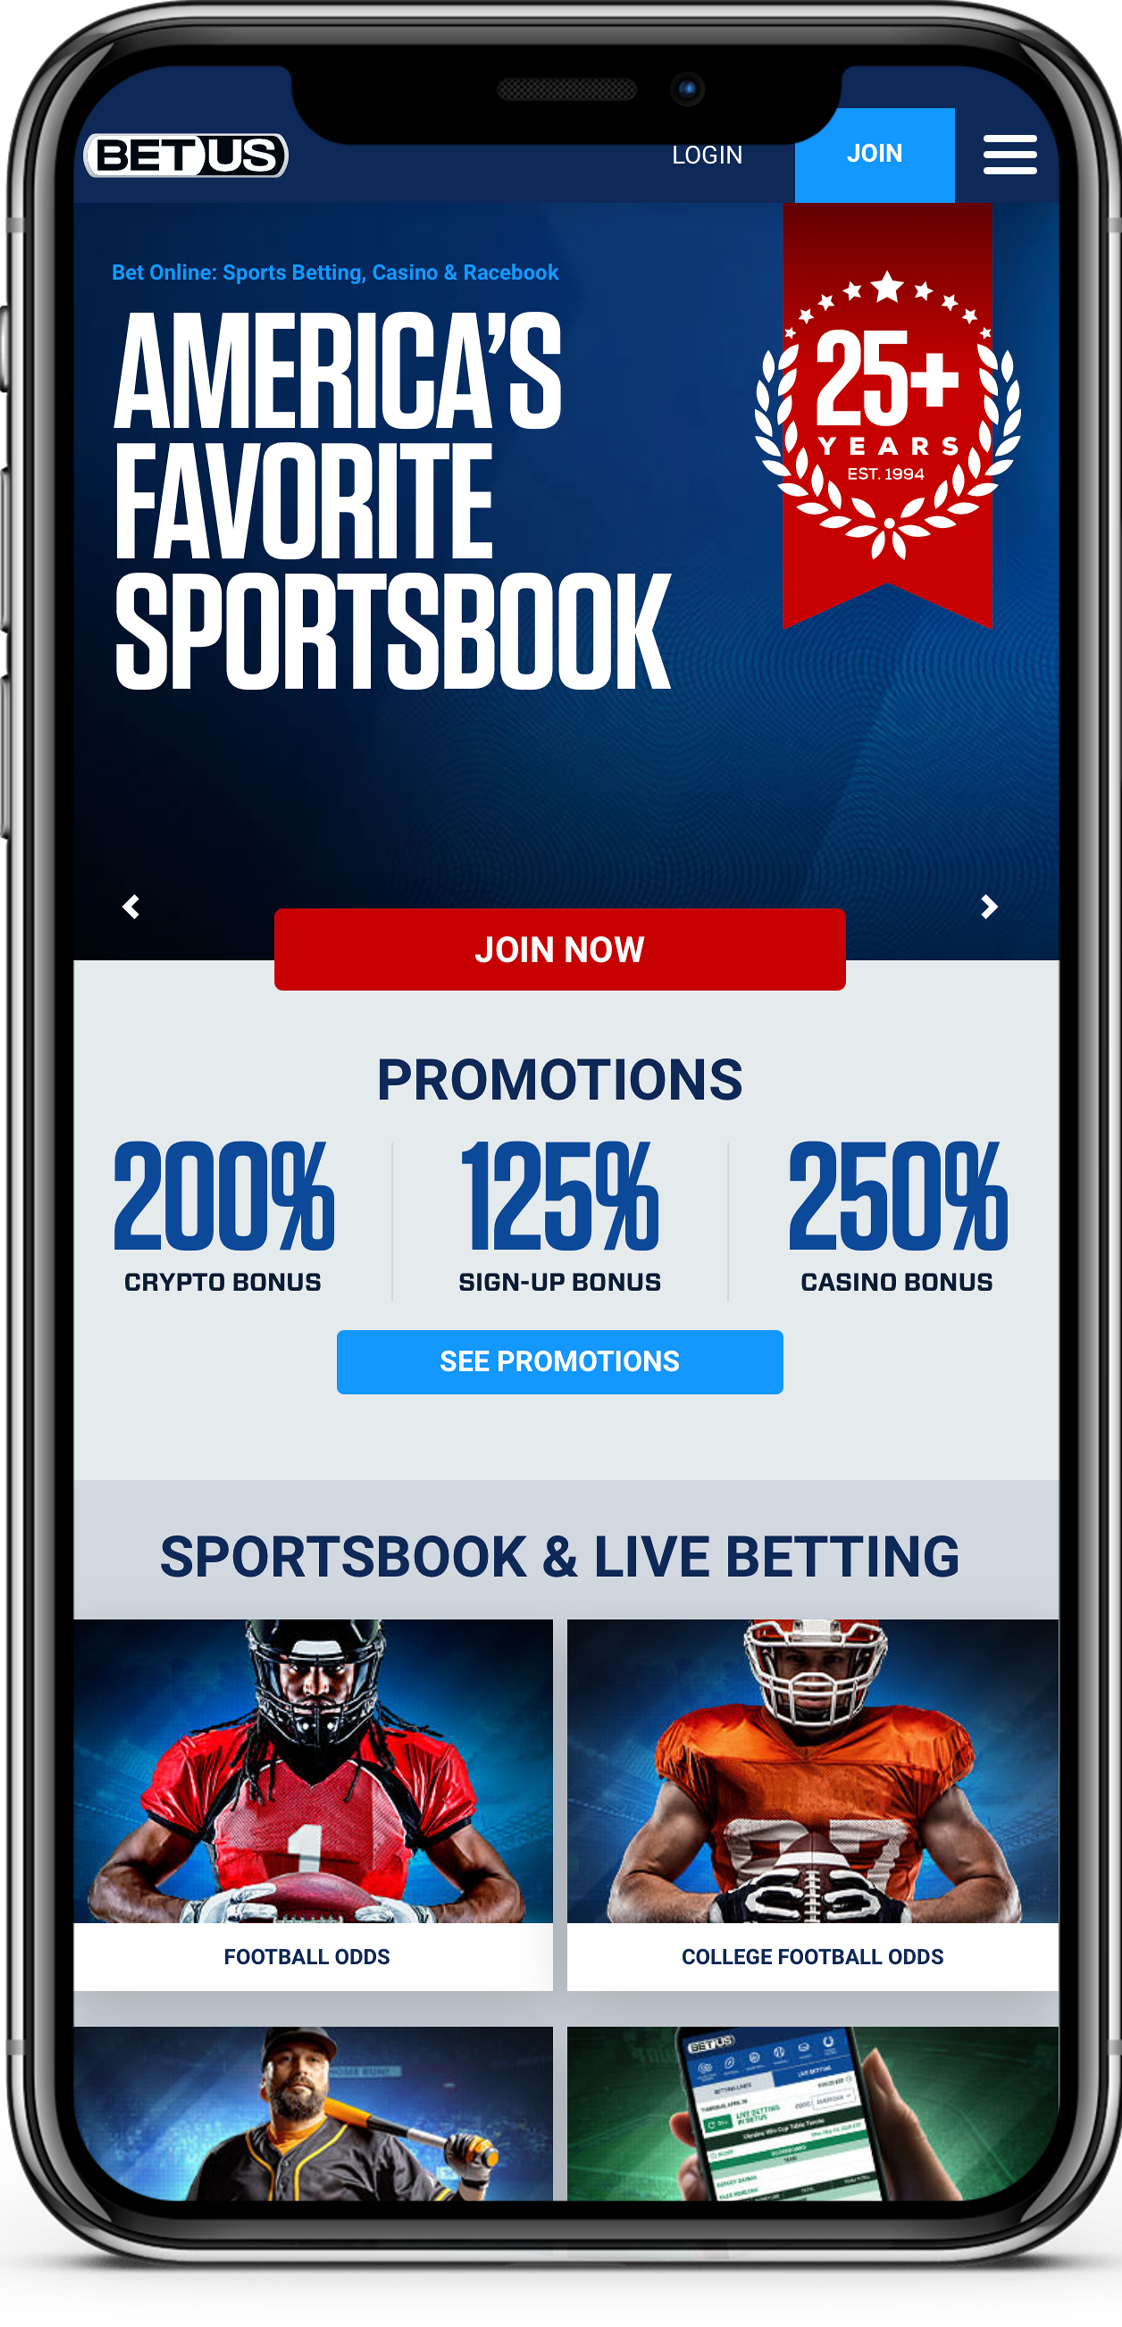 Page with information about sports-betting - interesting entry